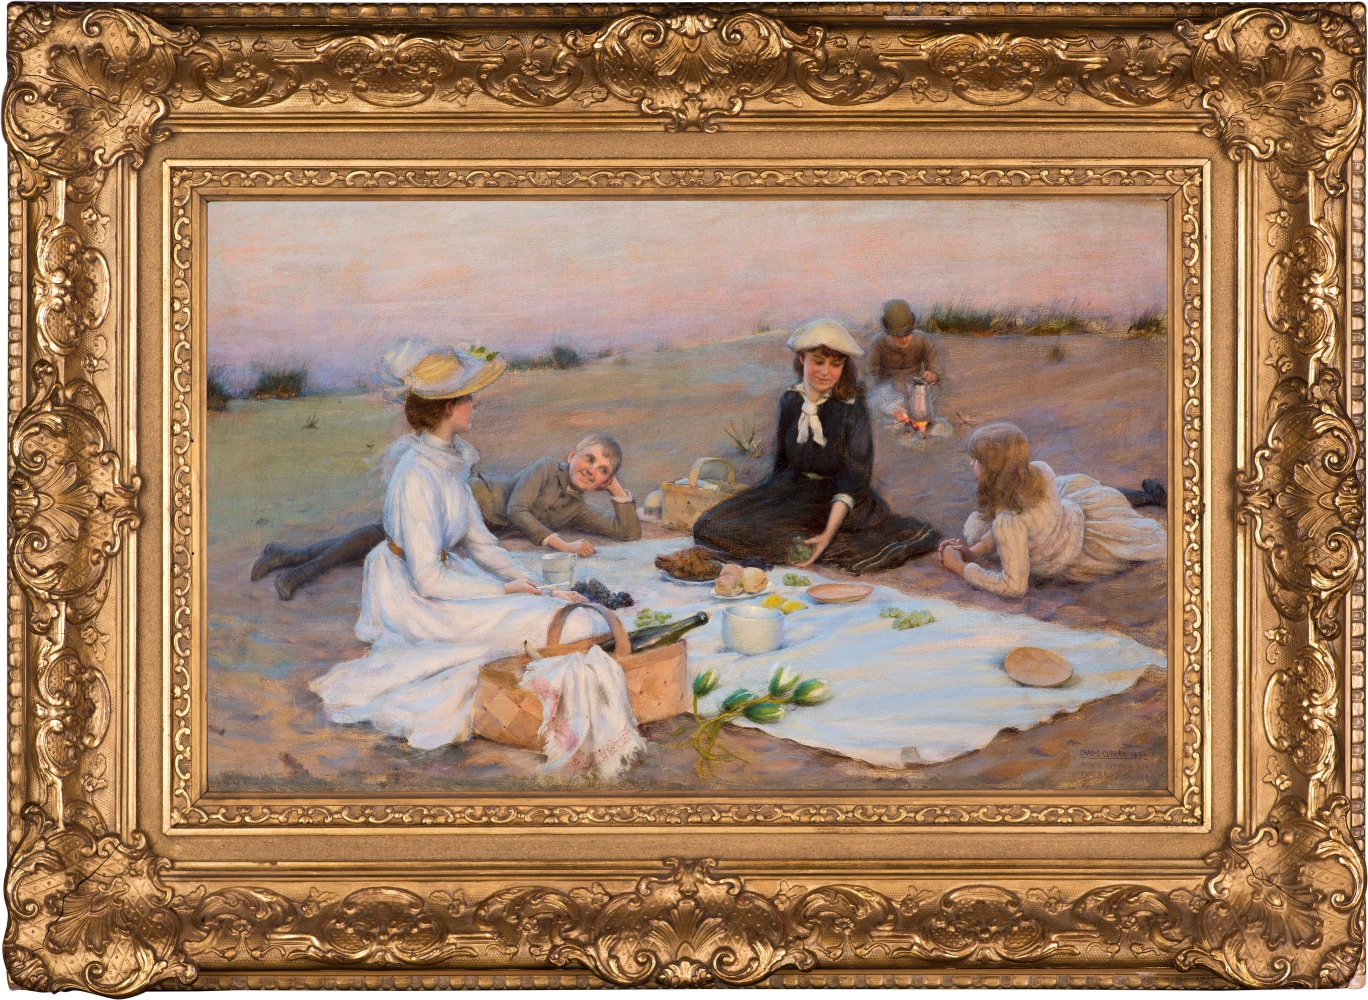 Charles Courtney Curran (1861–1942), Picnic Supper on the Sand Dunes, 1890, oil on canvas, 12 x 20 in., signed, dated, and titled lower right: Chas. C. Curran 1890 / Picnic Supper on / the Sand Dunes (framed)